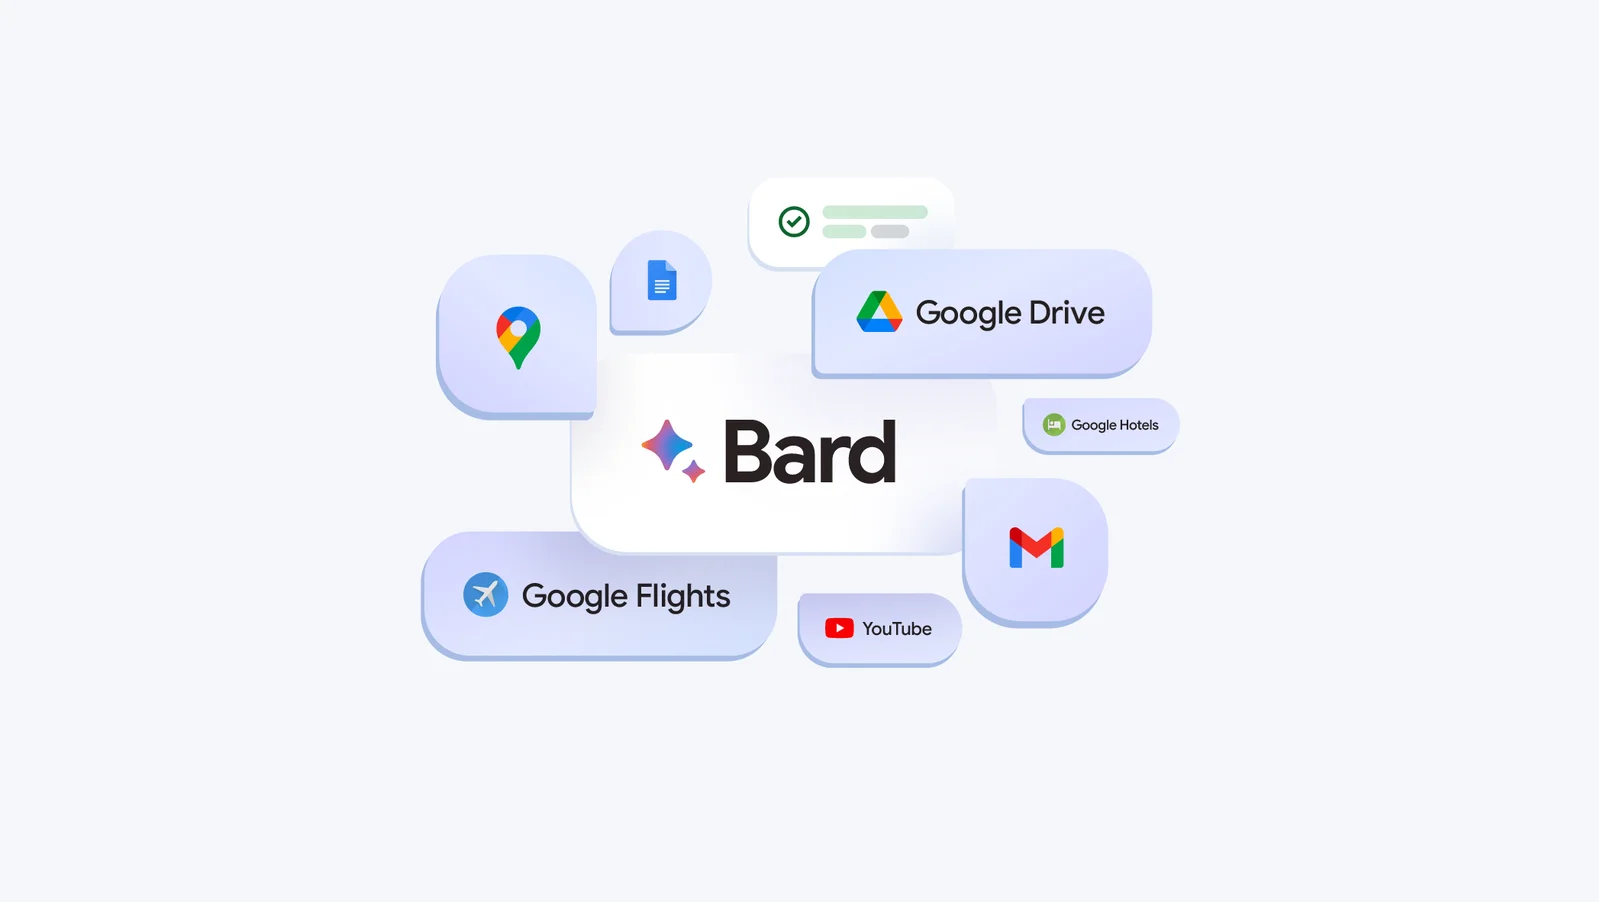 “The most capable Bard yet” connects to your Google apps and services